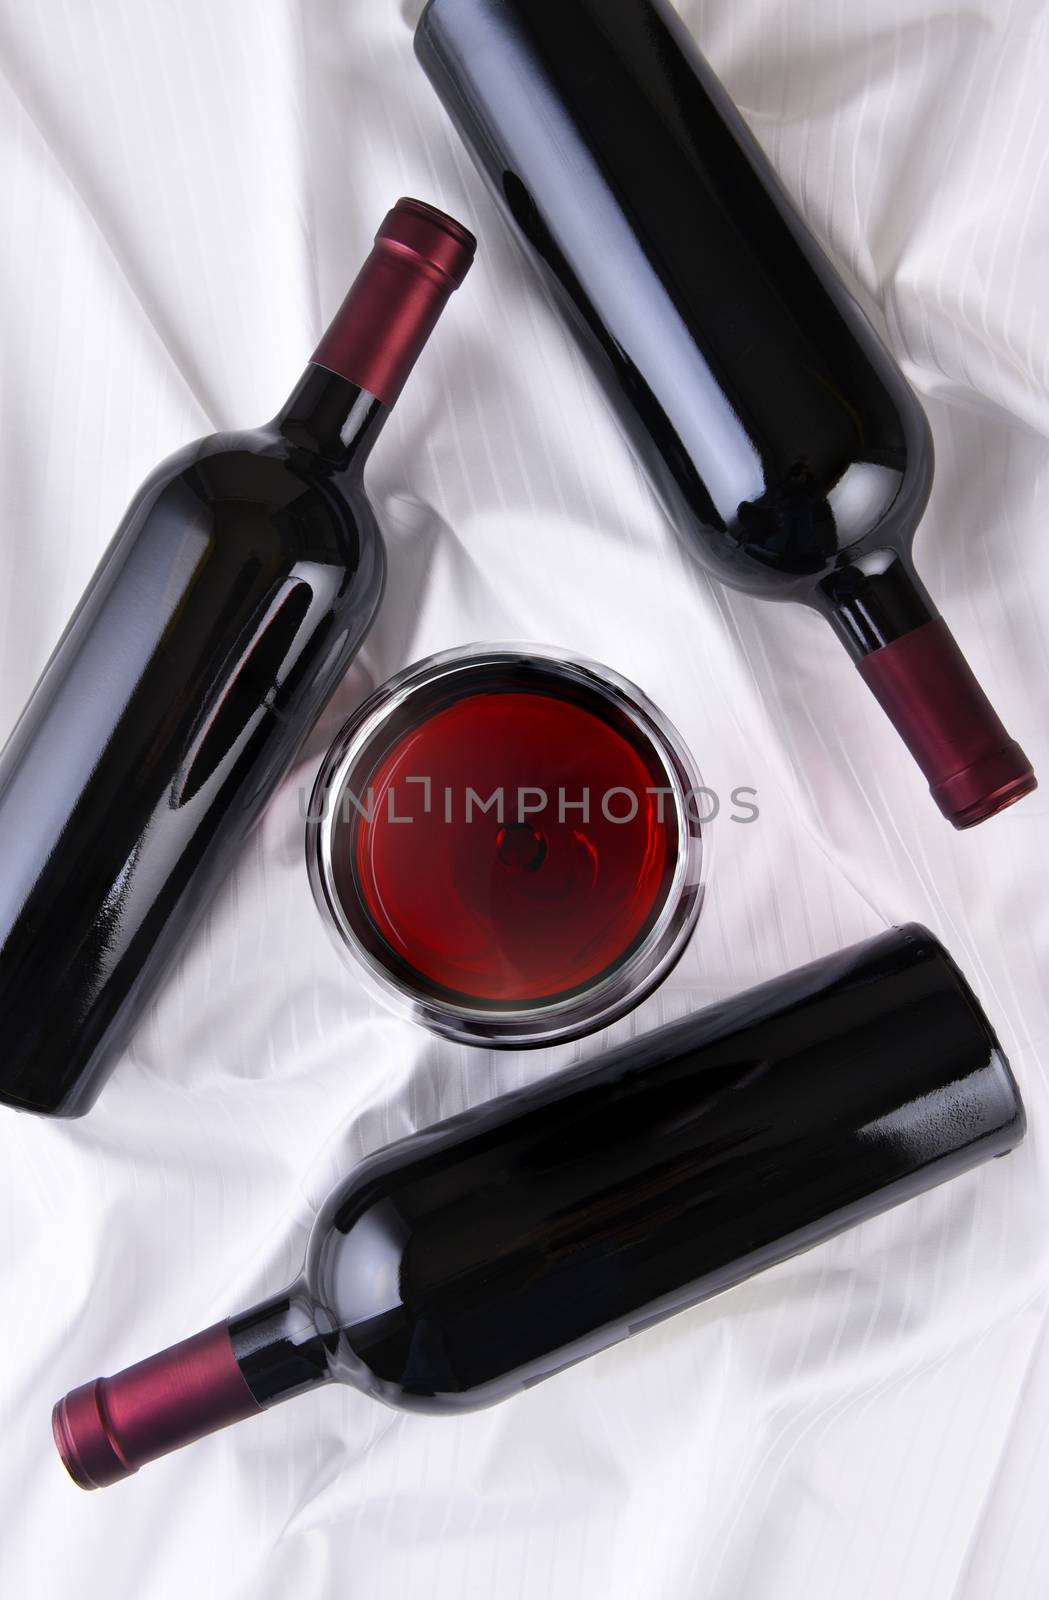 Wine glass in the center of three bottles laying on their sides on white fabric surface. Vertical orientation.